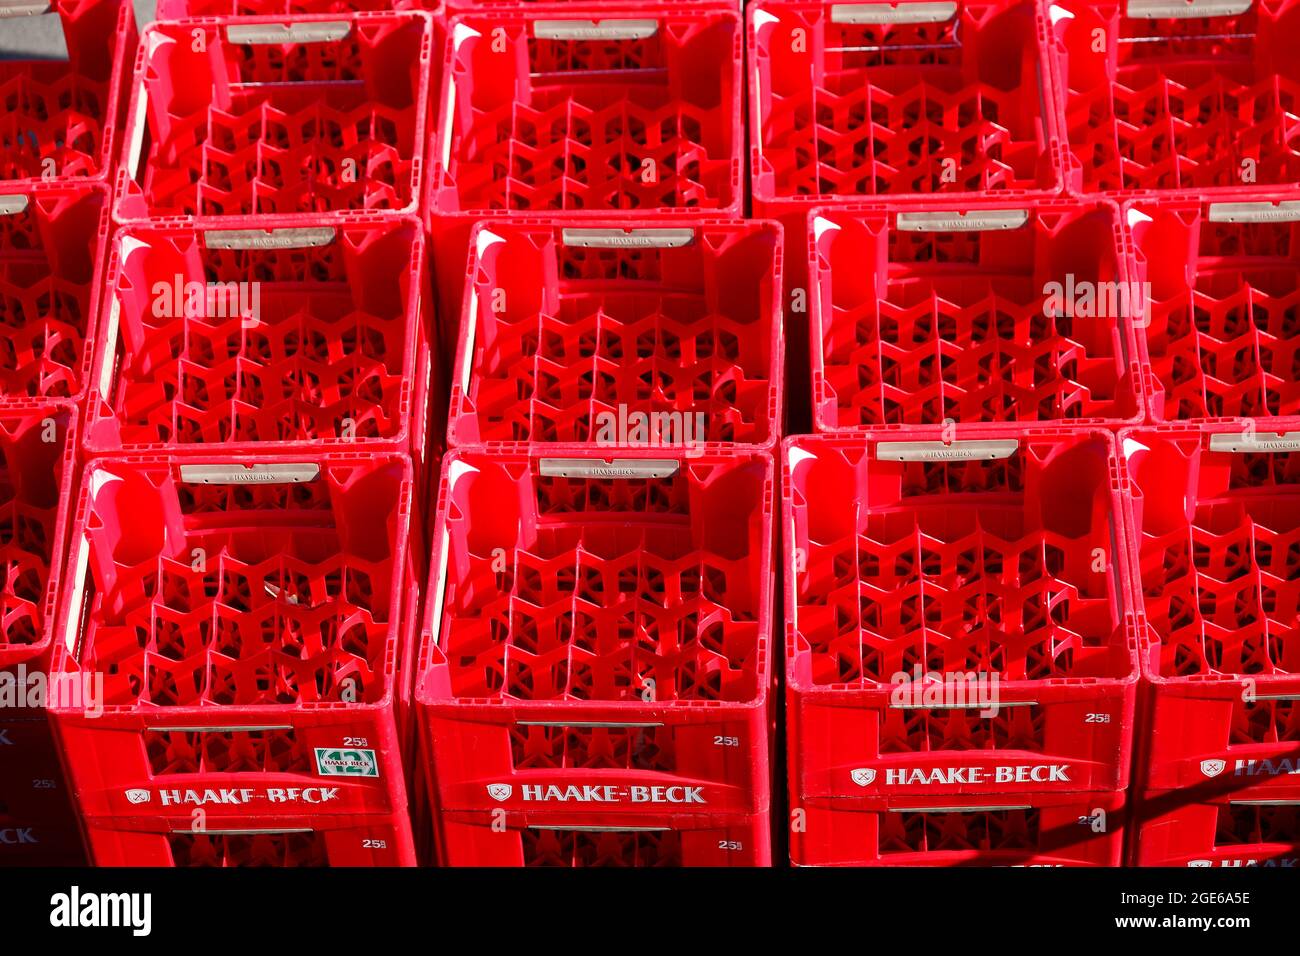 Empty, red Haake-Beck beer crates, Brauerei Beck GmbH & Co. KG, Bremen, Germany Stock Photo